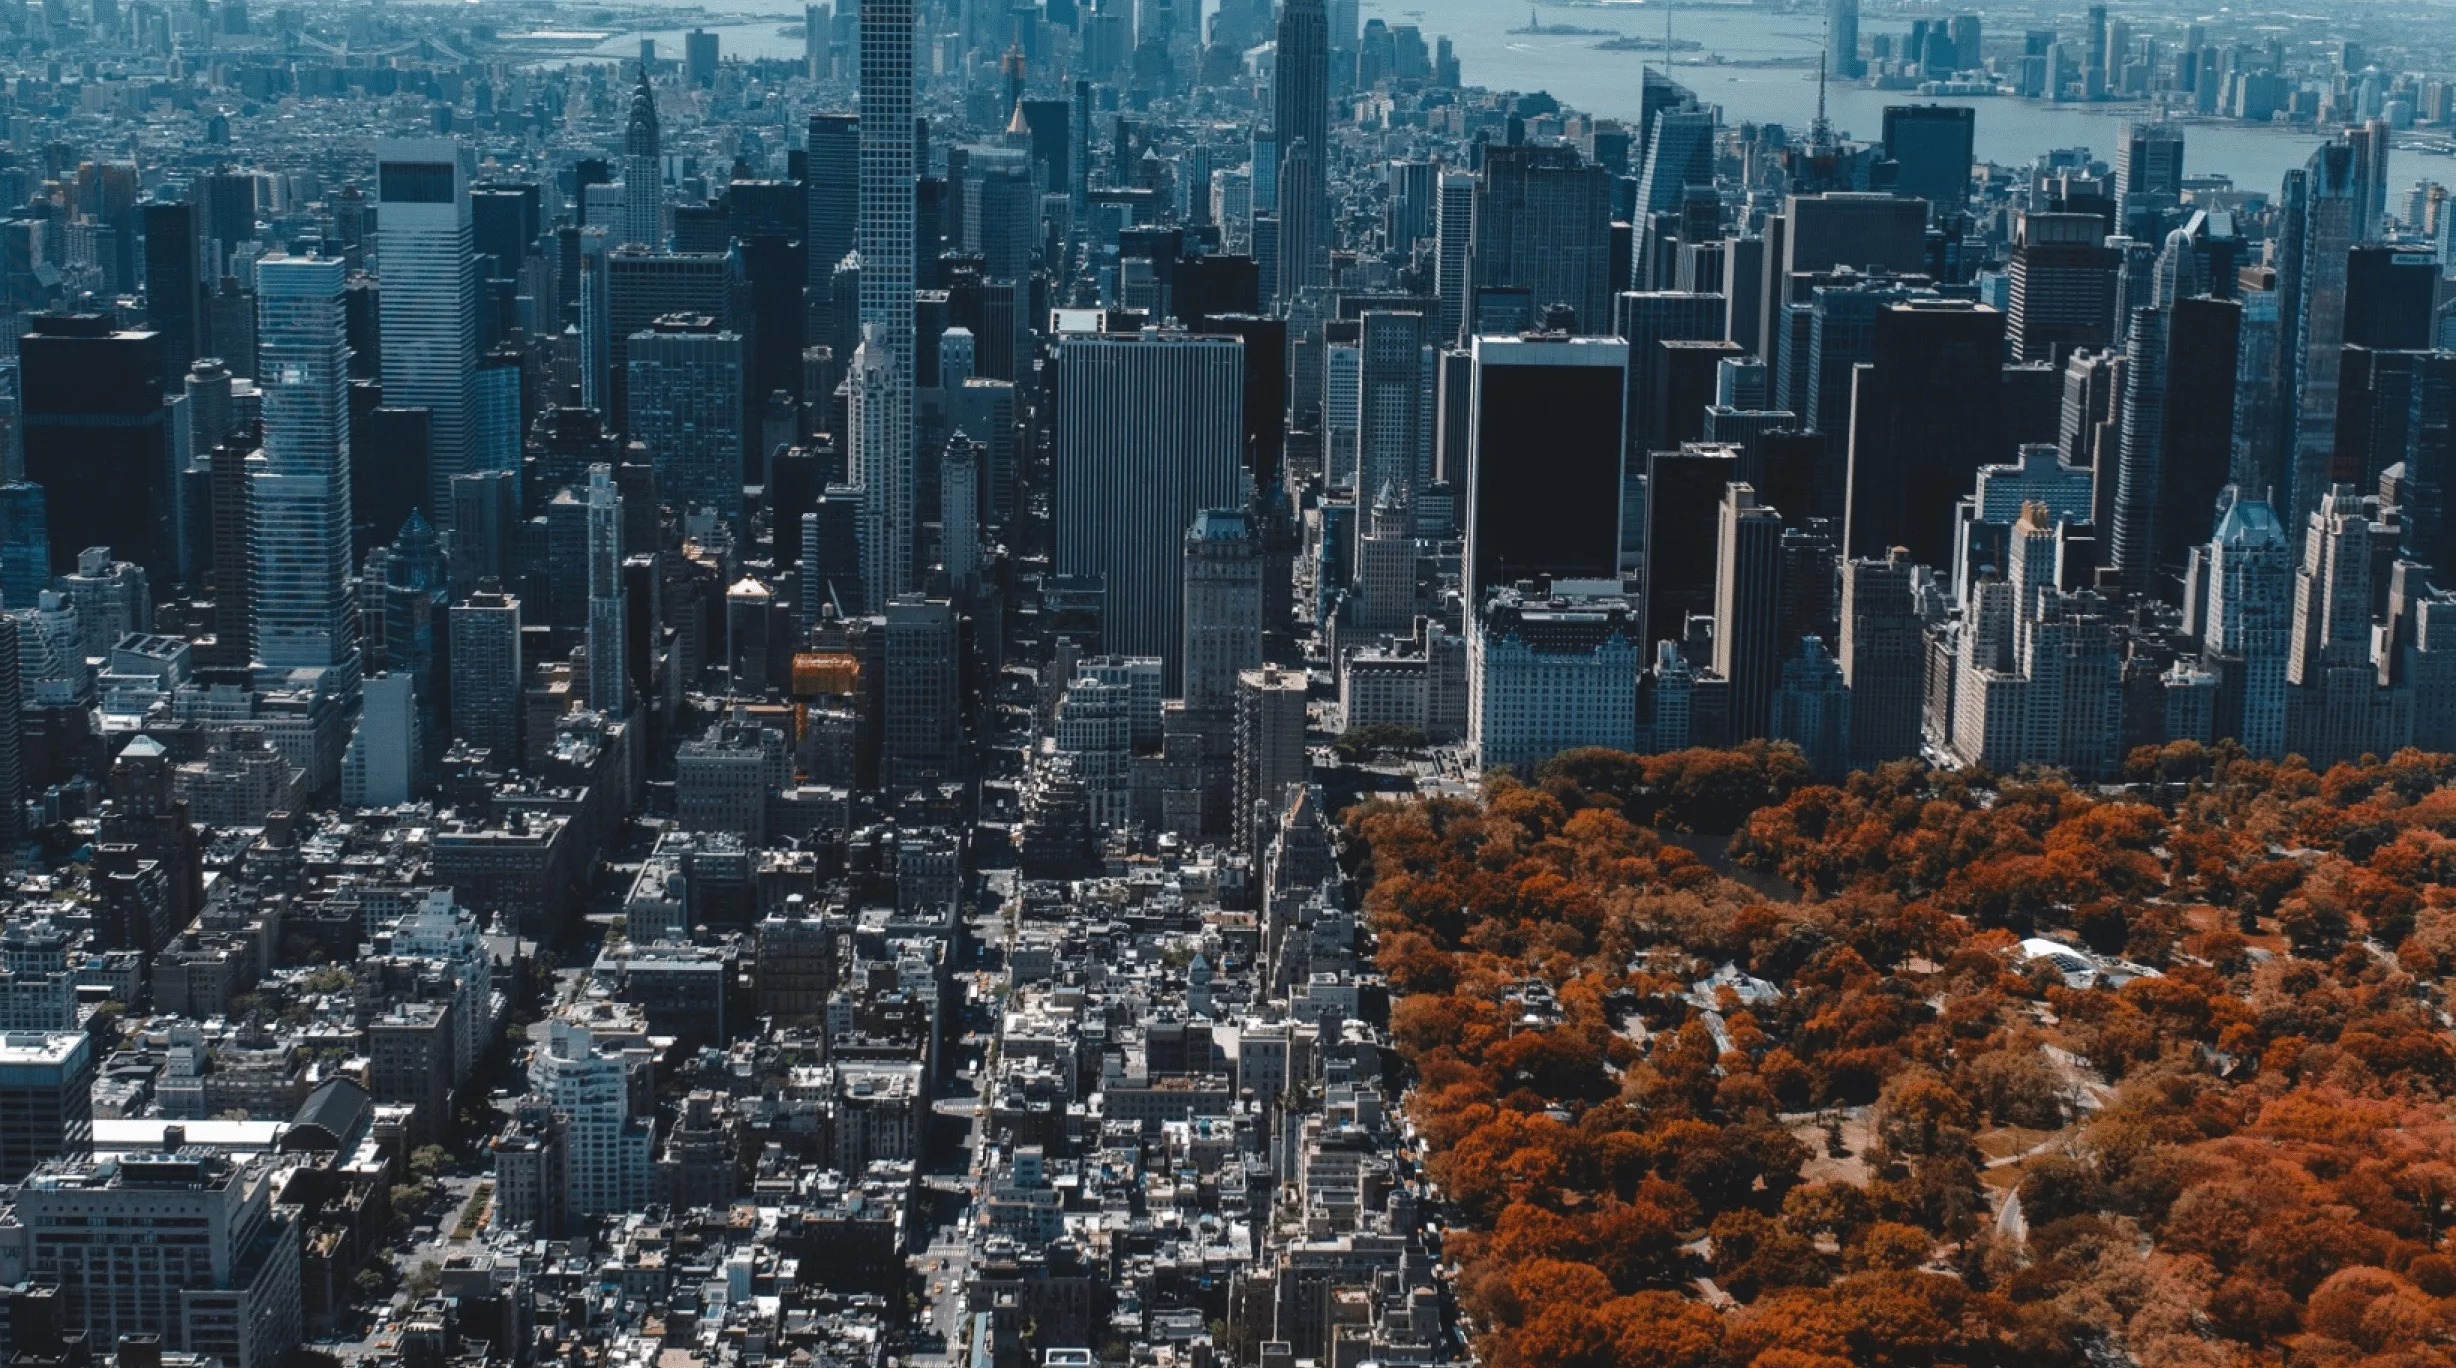 Downtown Manhattan in the fall